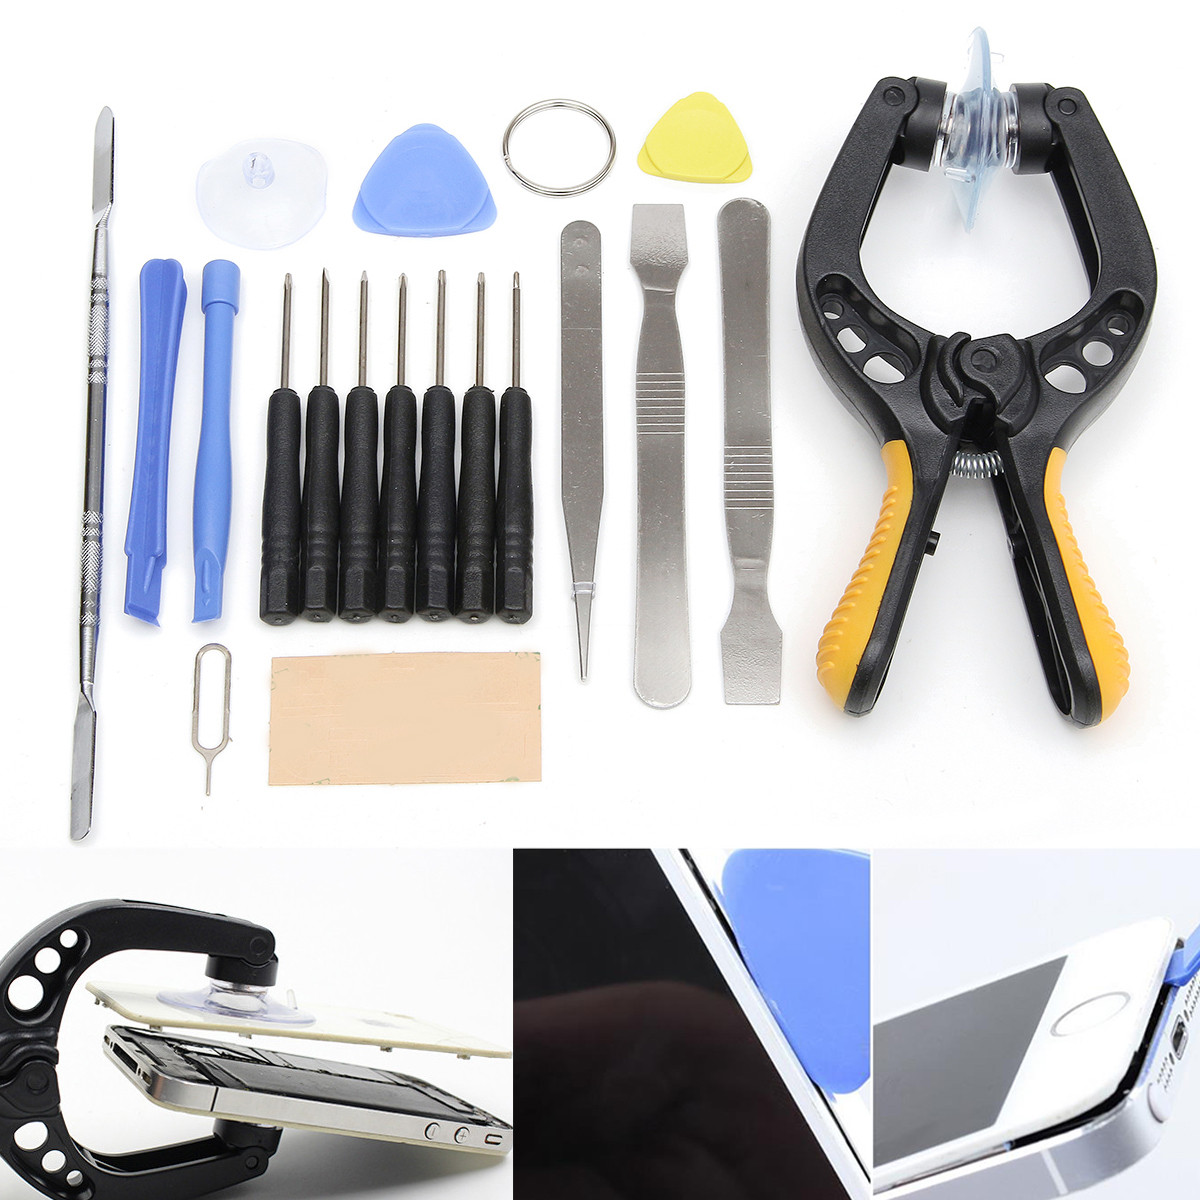 19 In 1 Phone Lcd Screen Opening Tool Plier Suction Cup Pry Spudger Repair Kit Set Online 